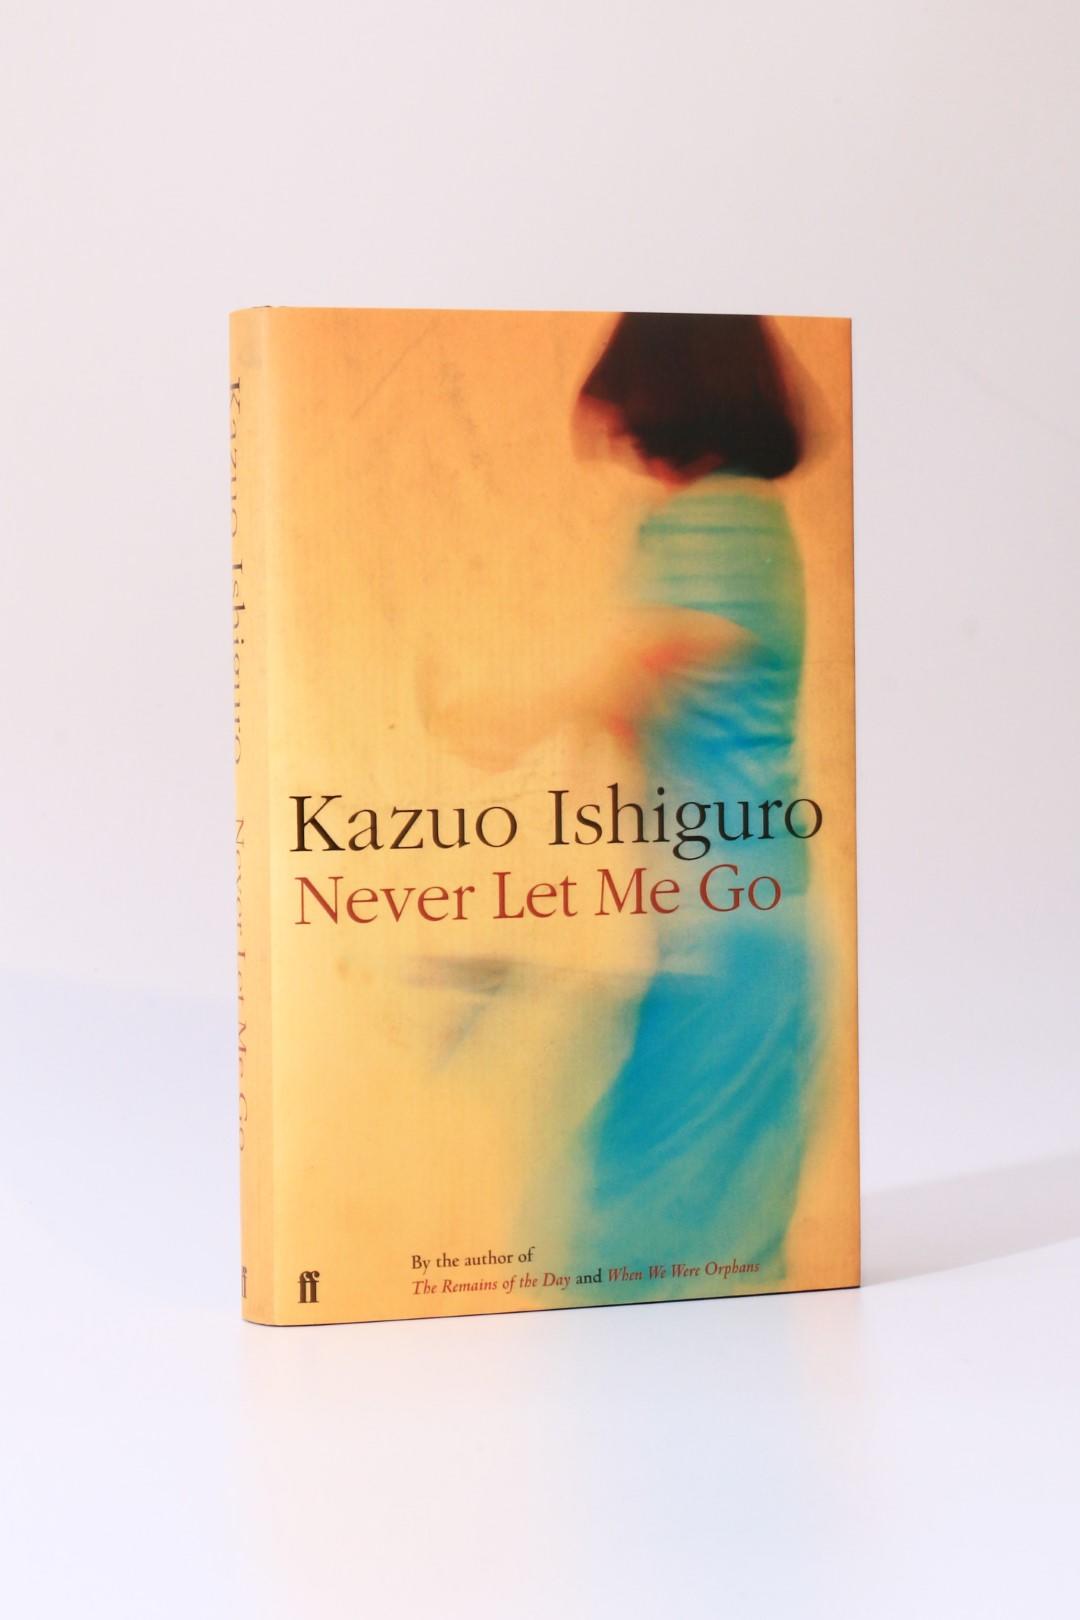 Kazuo Ishiguro - Never Let Me Go - Faber & Faber, 2005, Signed First Edition.